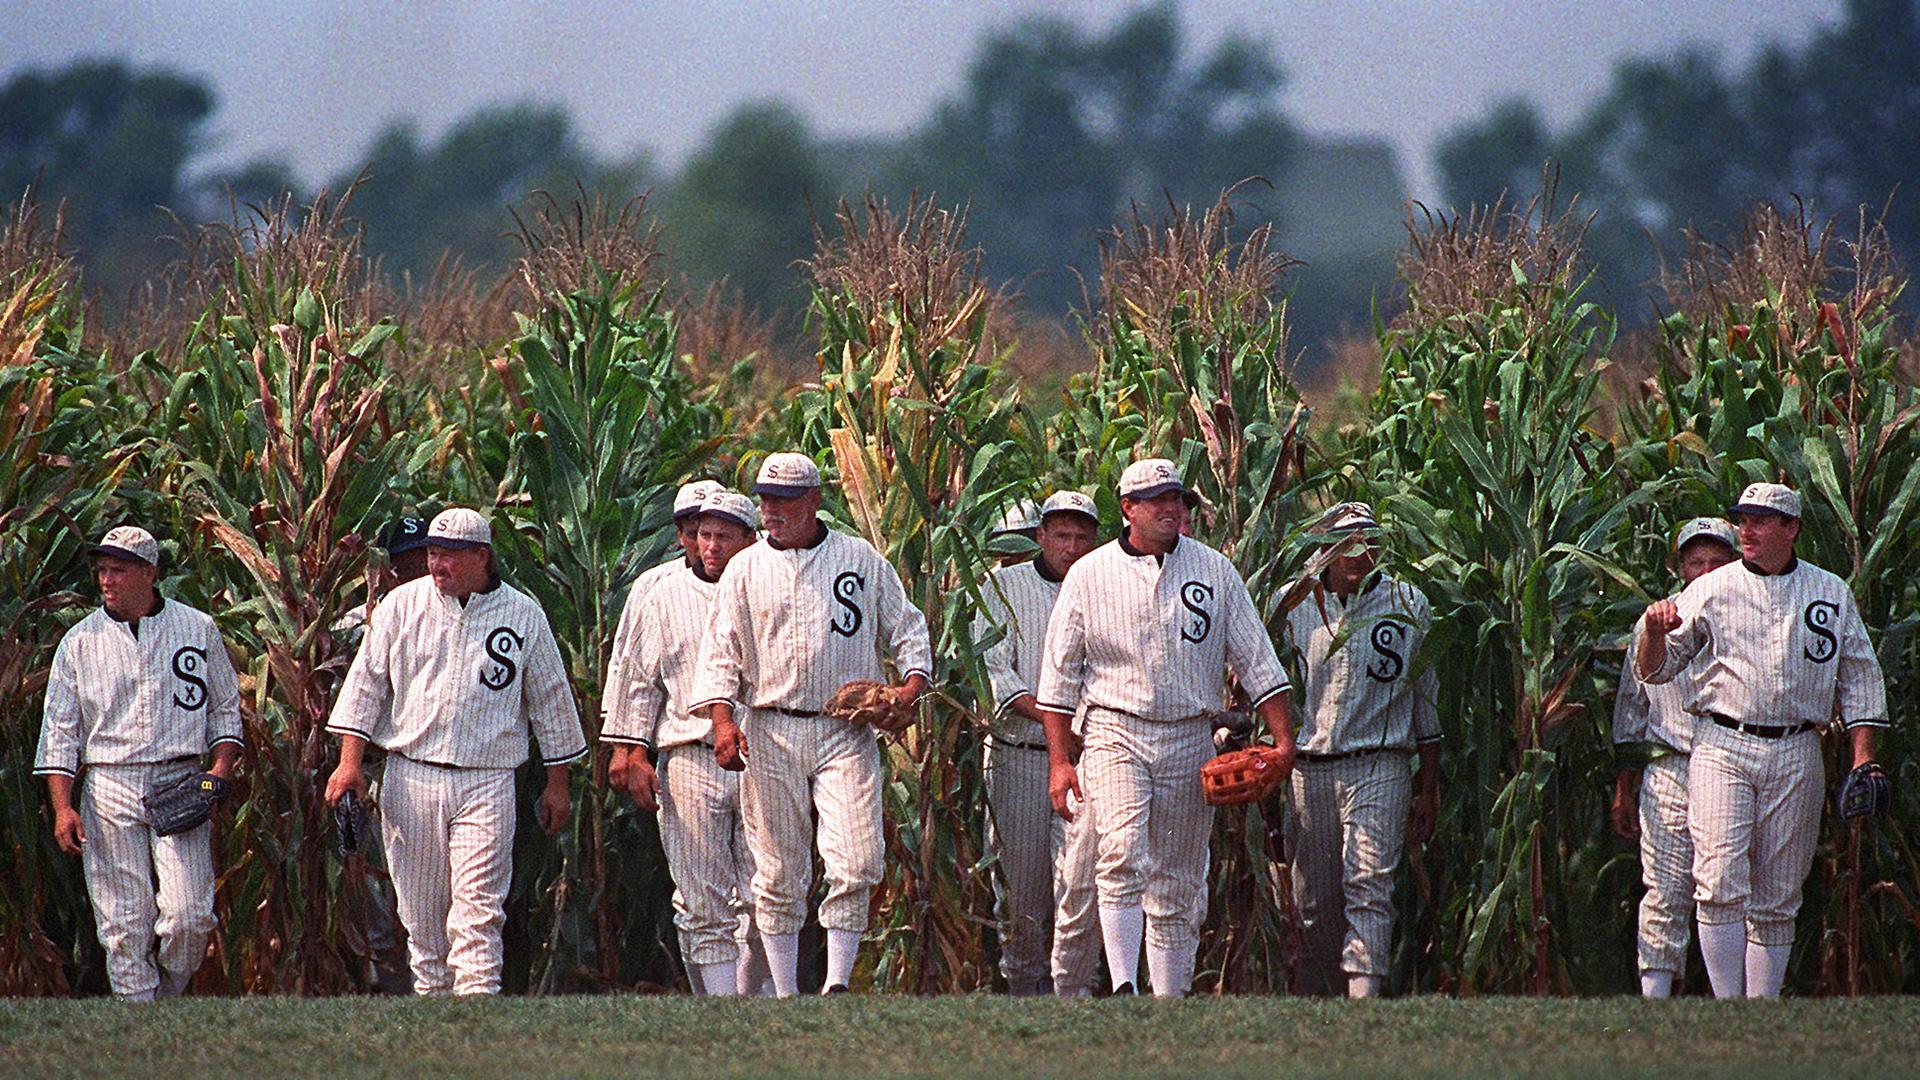 White Sox, Yankees to Play at ‘Field of Dreams’ in 2020 Chicago News